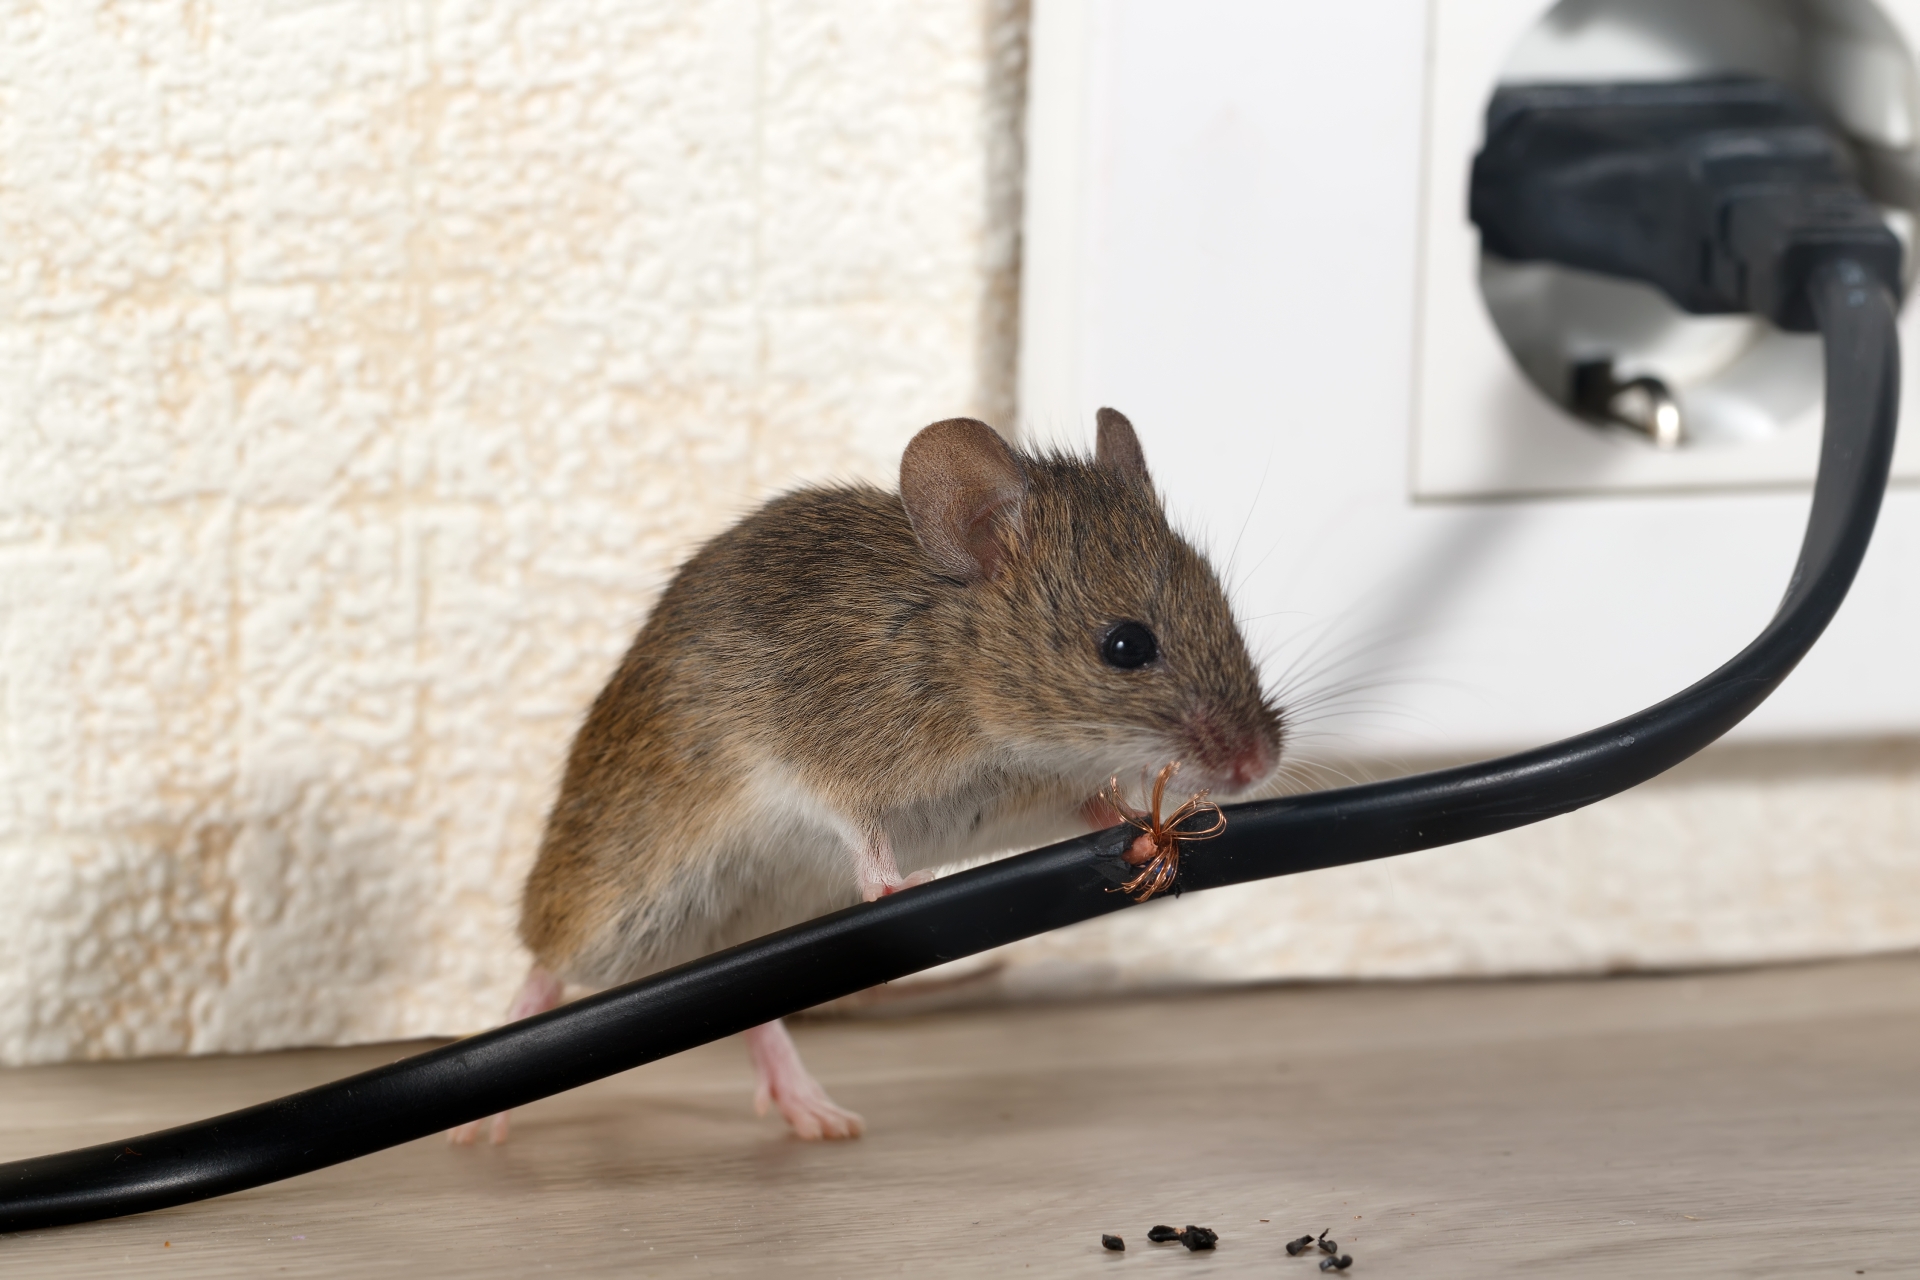 Mice Infestation, Pest Control in Cockfosters, East Barnet, EN4. Call Now 020 8166 9746